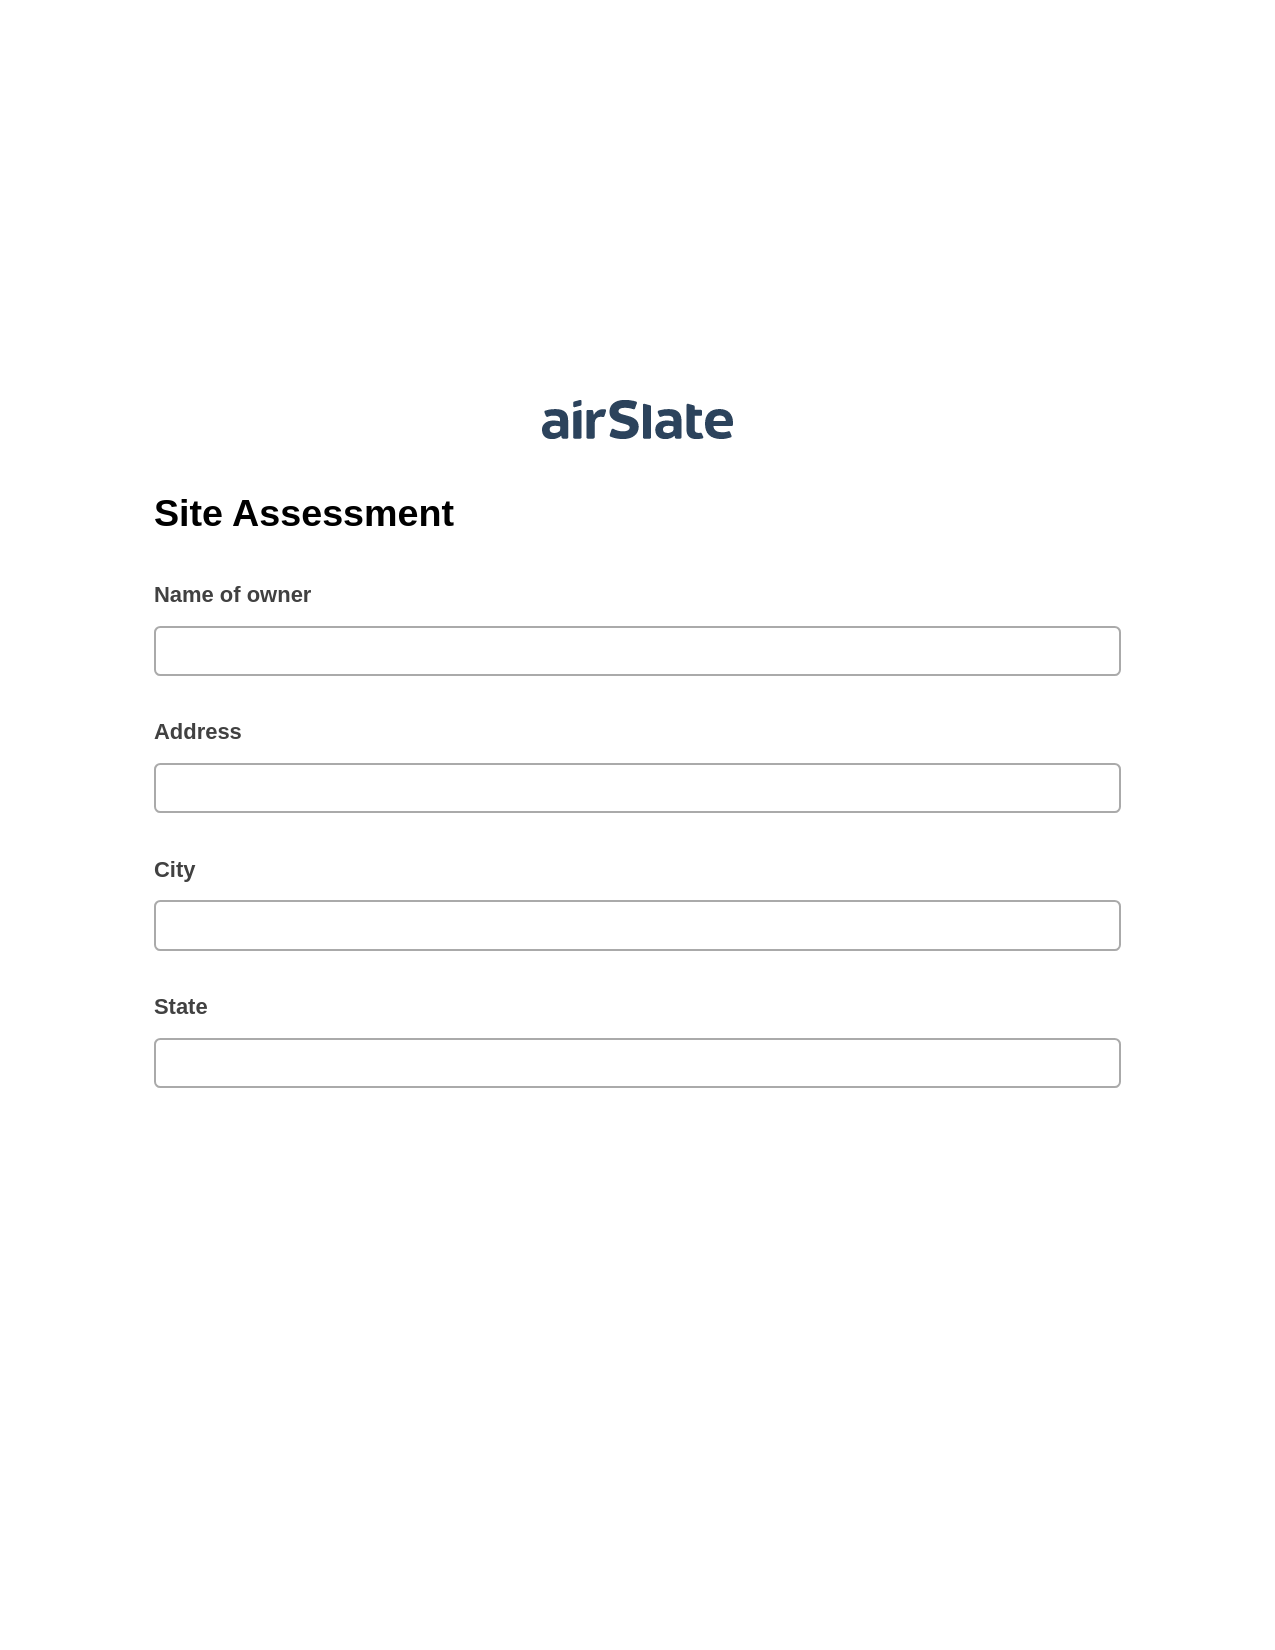 Multirole Site Assessment Pre-fill from Salesforce Record Bot, Pre-fill with Custom Data Bot, Archive to SharePoint Folder Bot